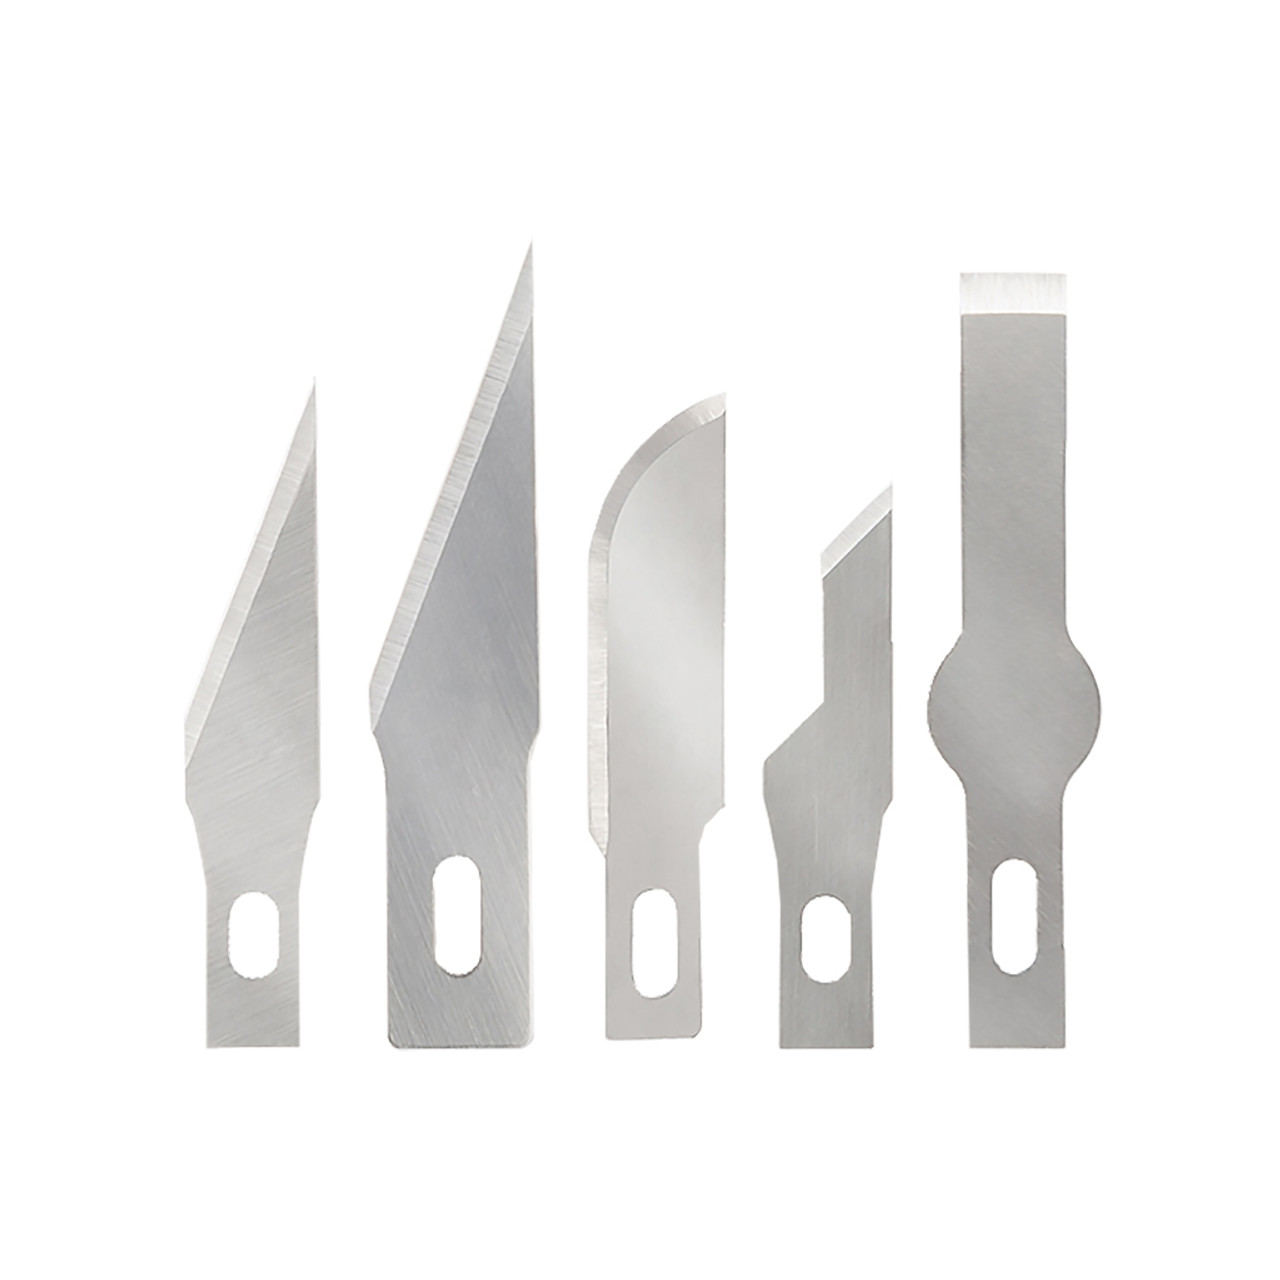 Review – Excel #11 Hobby Knife Blades